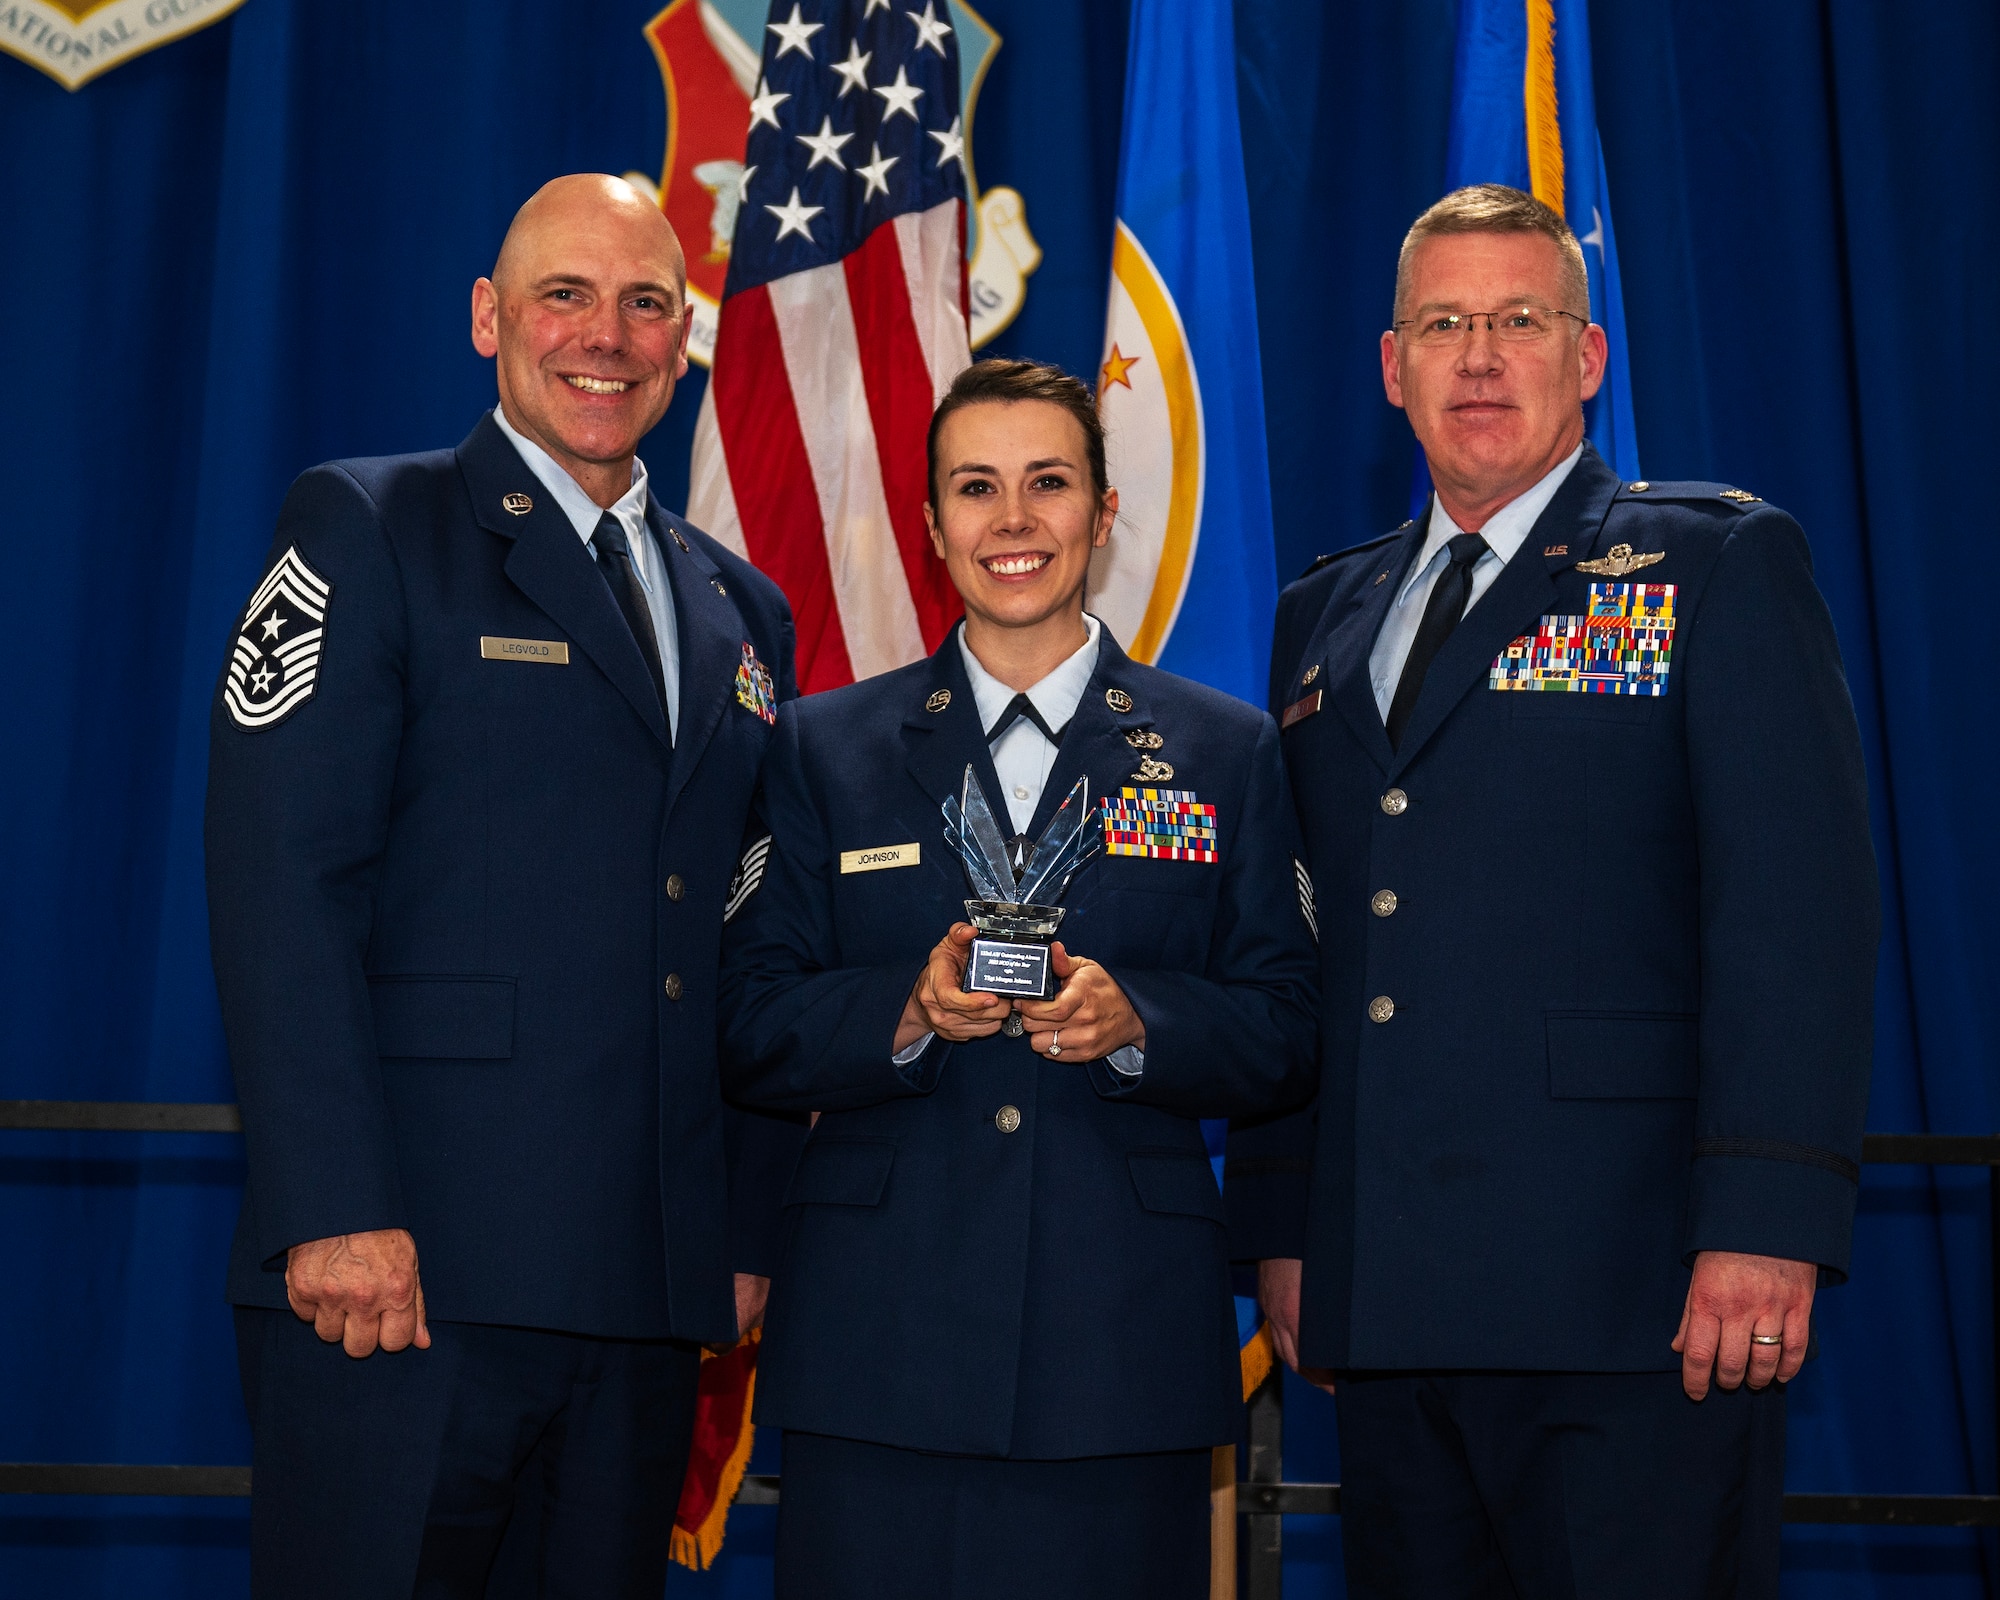 U.S. Air Force Tech. Sgt. Morgan Johnson, 133rd Mission Support Group, receives the 2022 Non-Commissioned Officer of the Year award in St. Paul, Minn., Dec. 11, 2022.